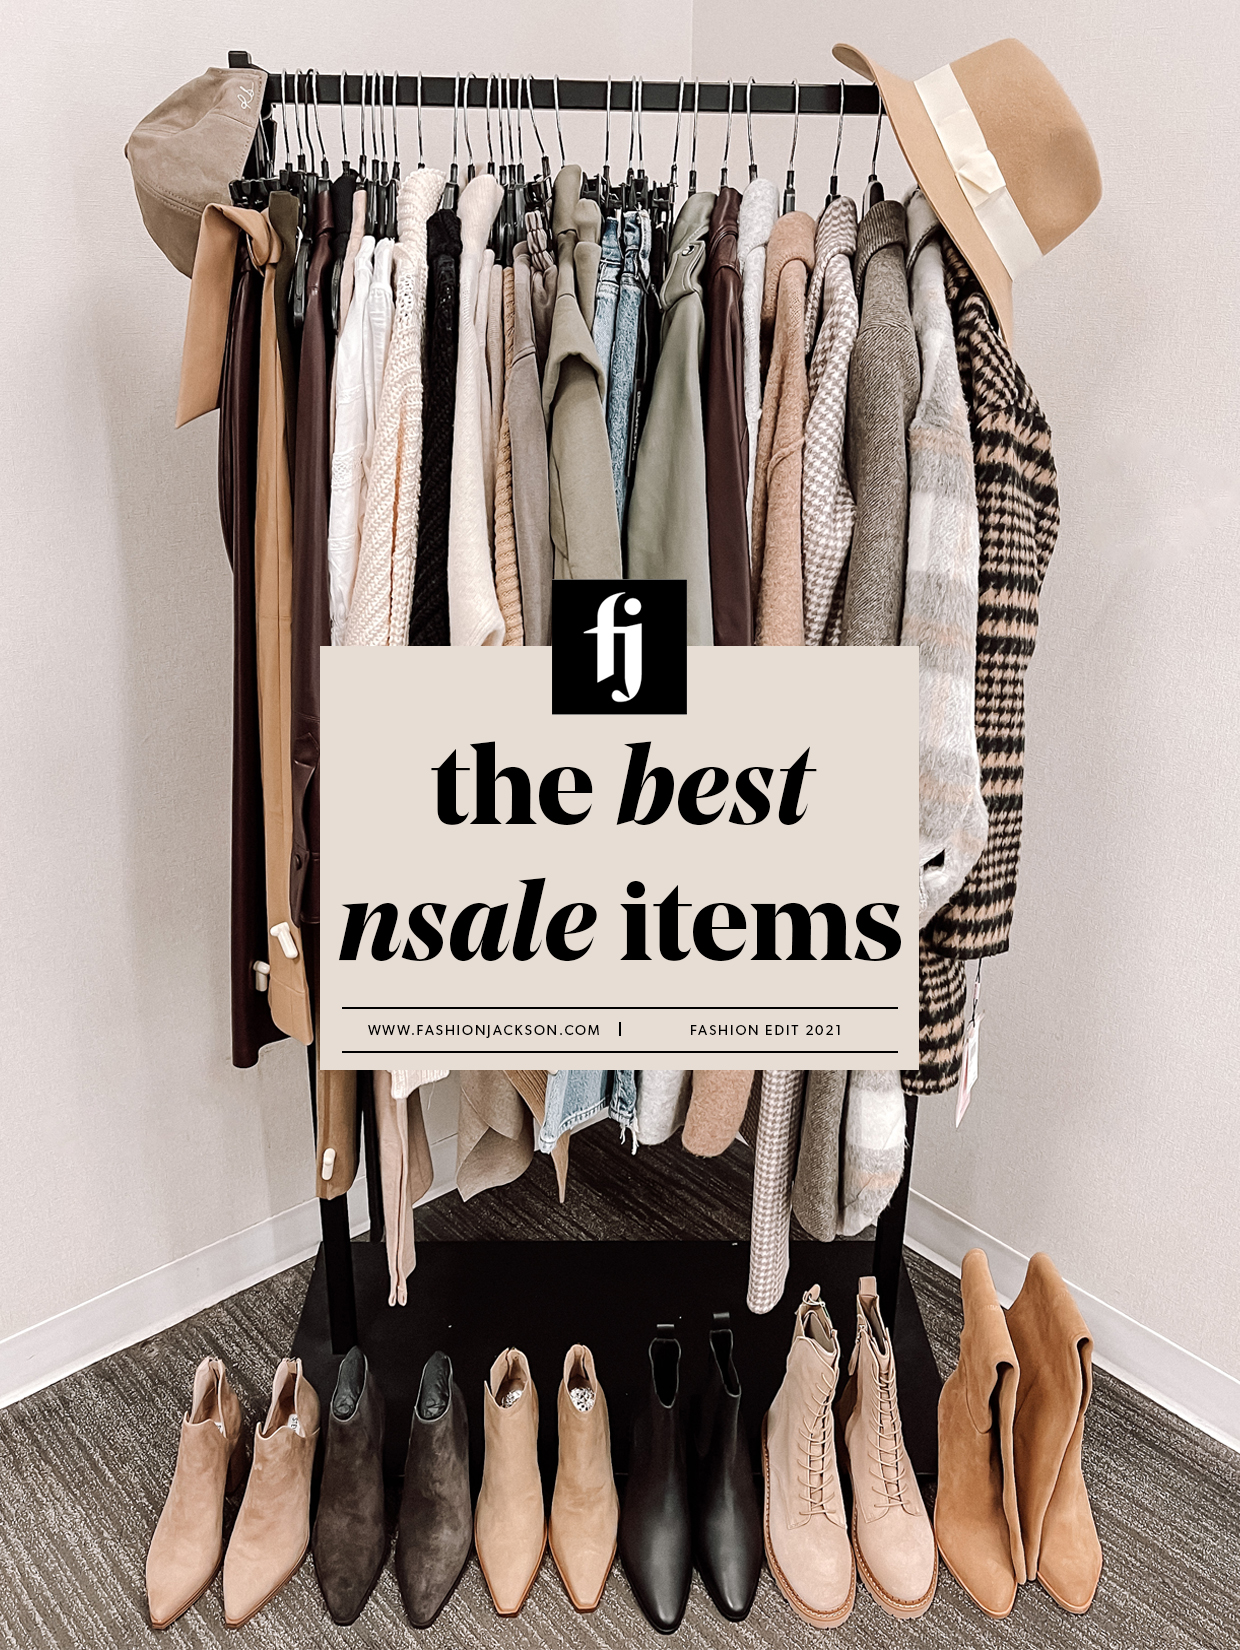 The One Item You Need From Nordstrom's Fall Sale